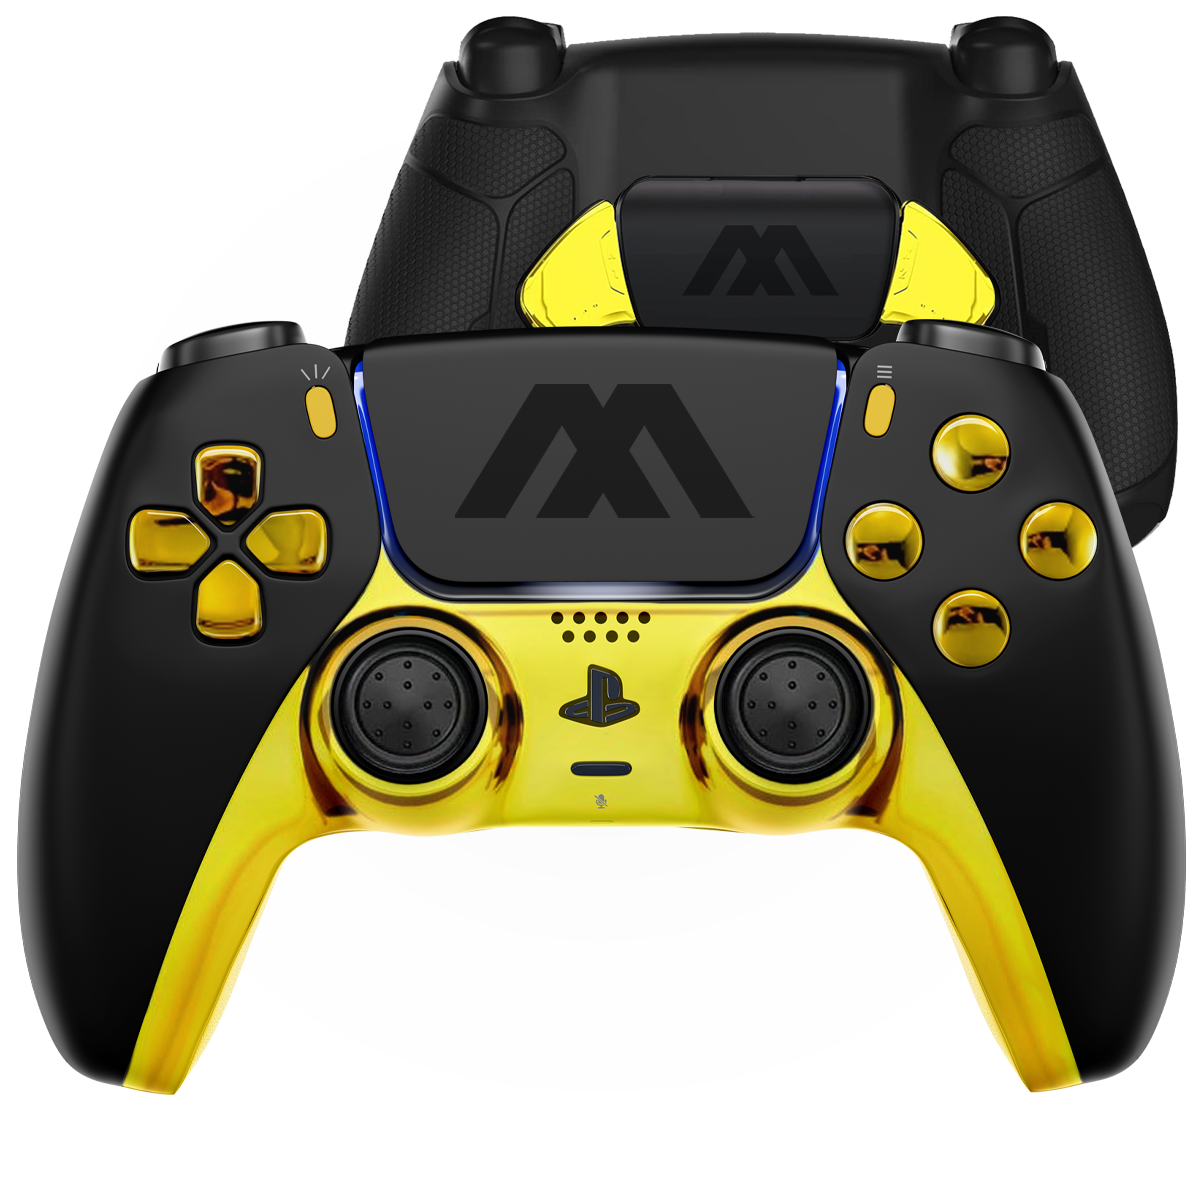 MODDEDZONE Black/Gold Smart Rapid Fire Controller Compatible with PS5  Custom Modded Controller All Shooter Games & More